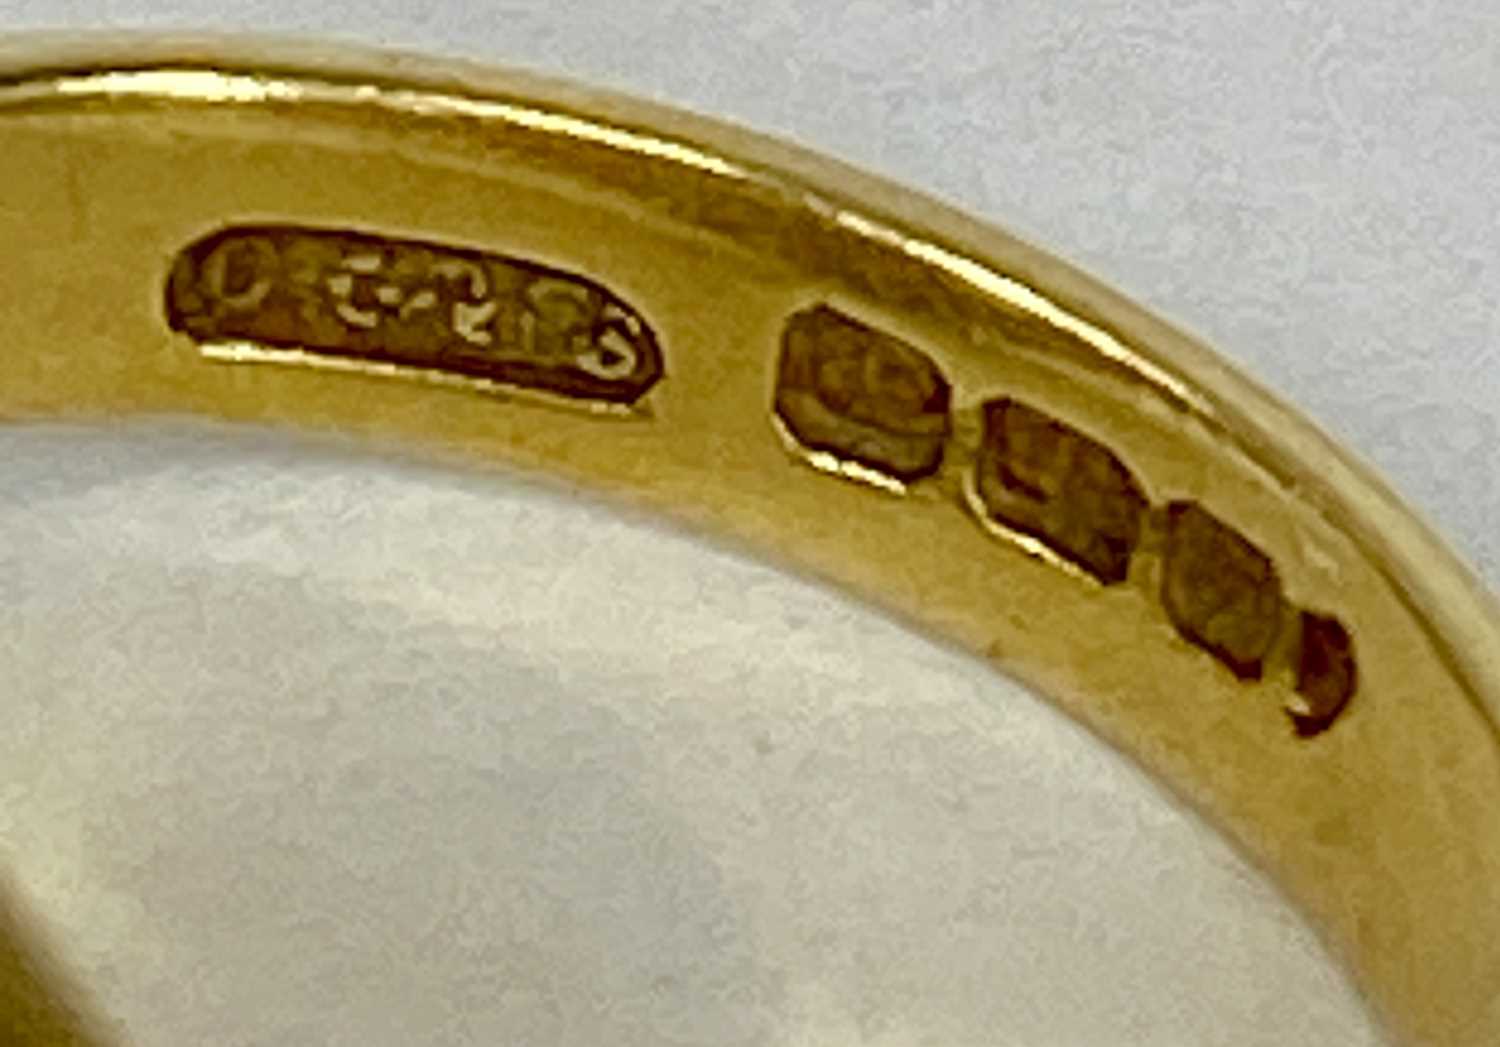 18CT GOLD SIGNET RING, engraved with crest, size M-N, 10.7gms Provenance: private collection Ynys - Image 3 of 4